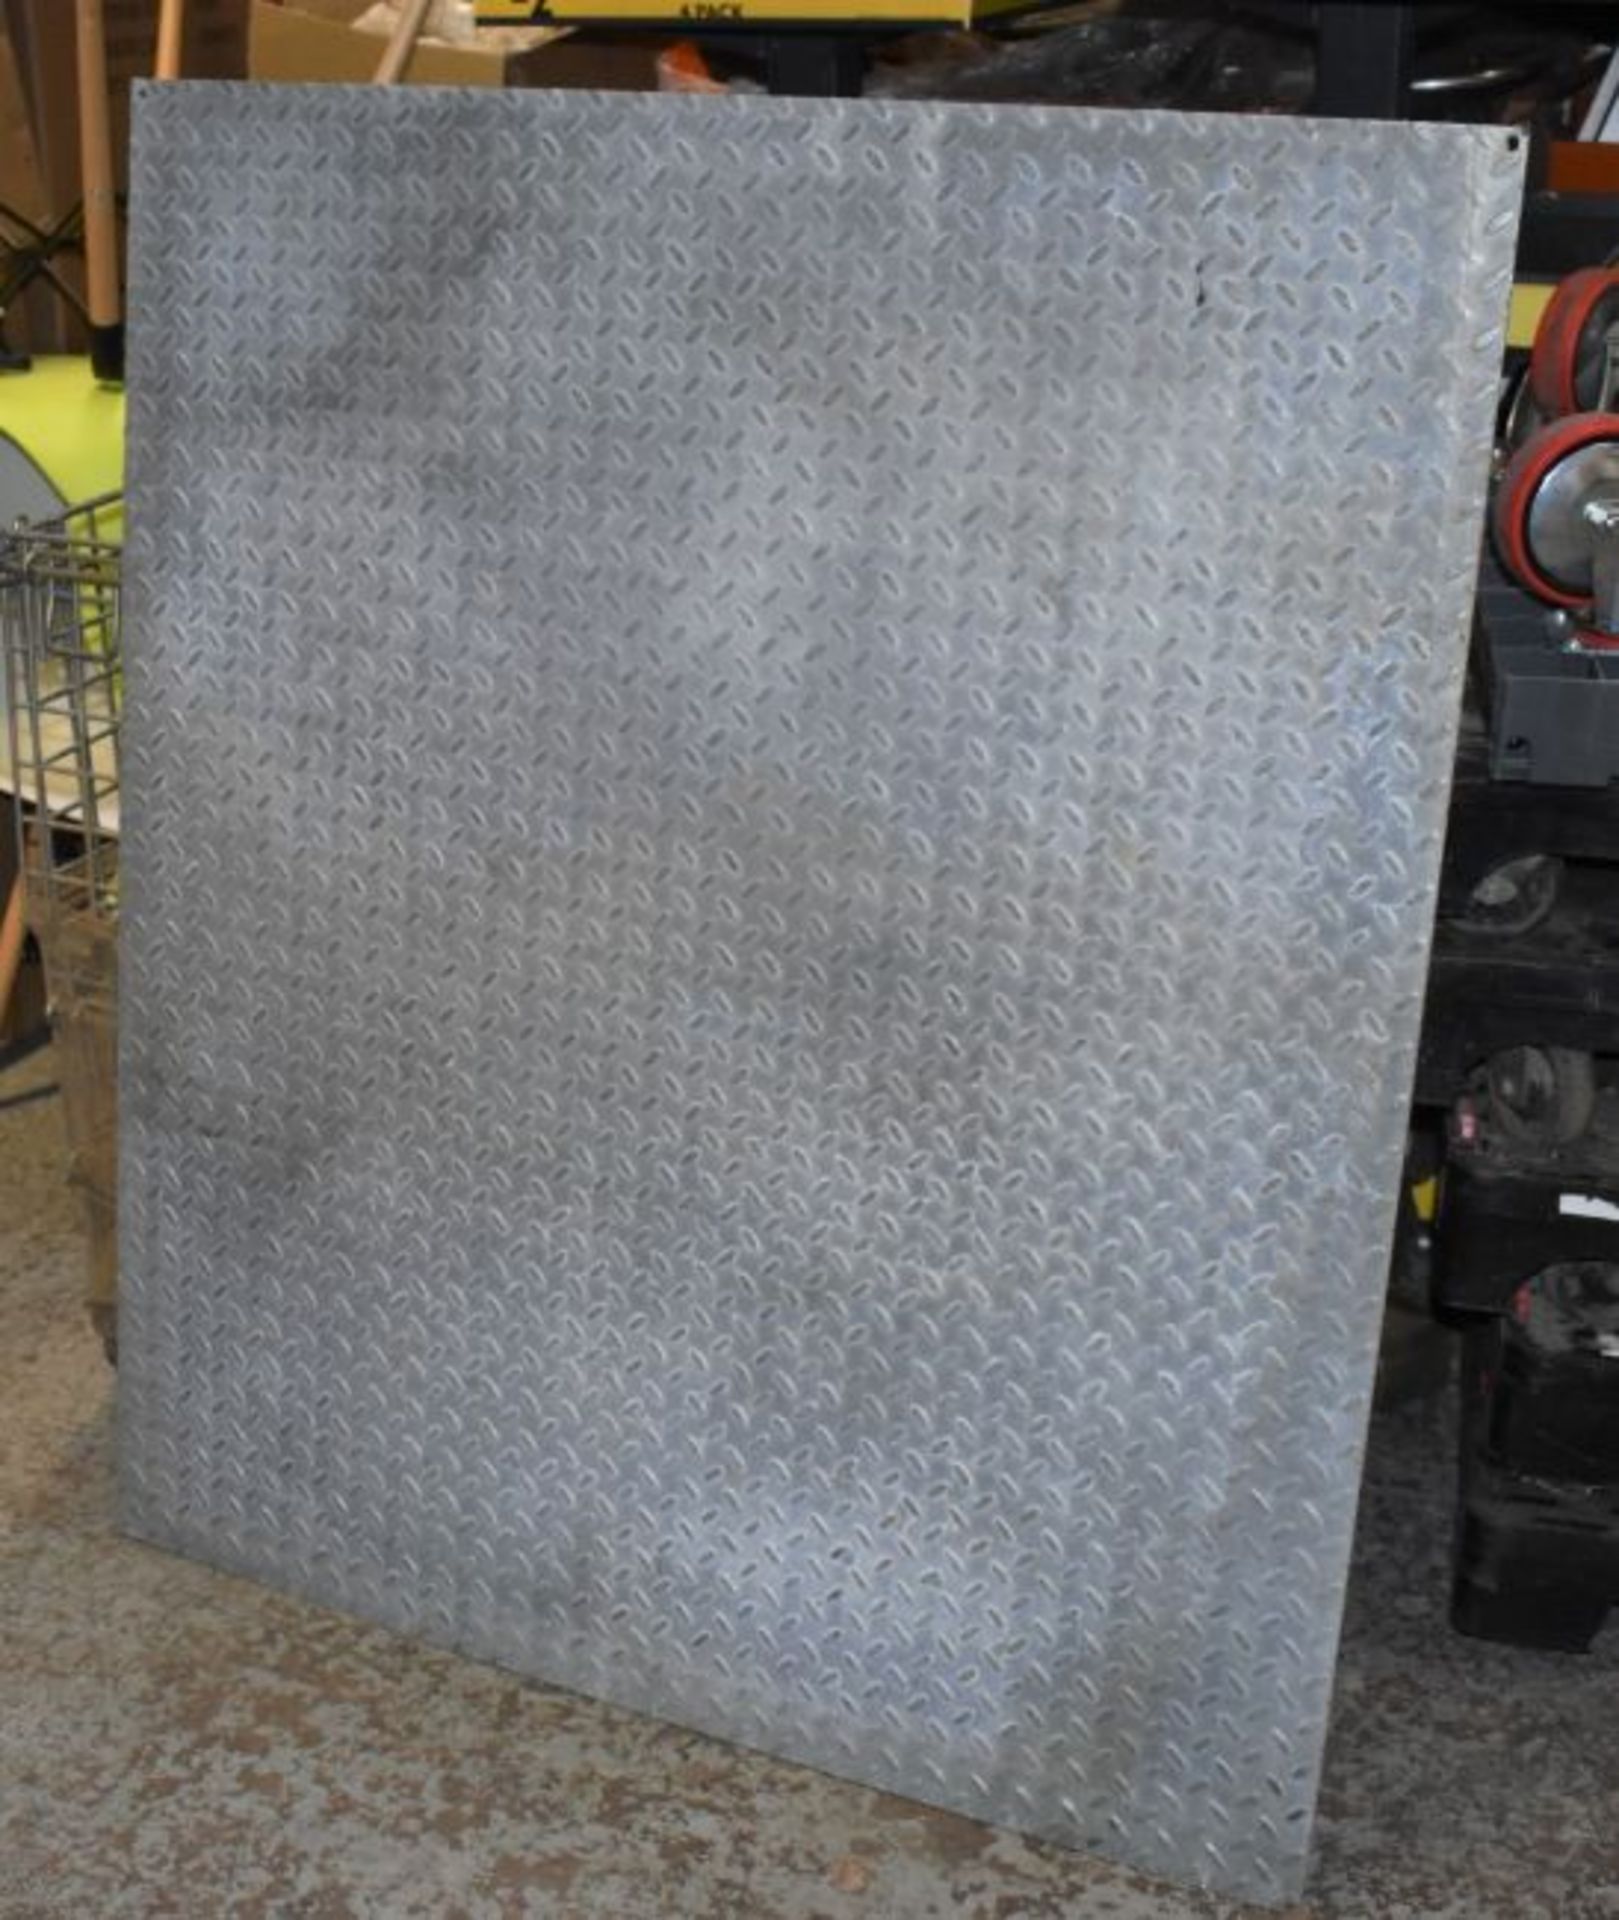 1 x Steel Tread Checker Plate - Size 106.5 x 122 x 0.6 cms - None Slip Floor Plate Suitable For - Image 6 of 6